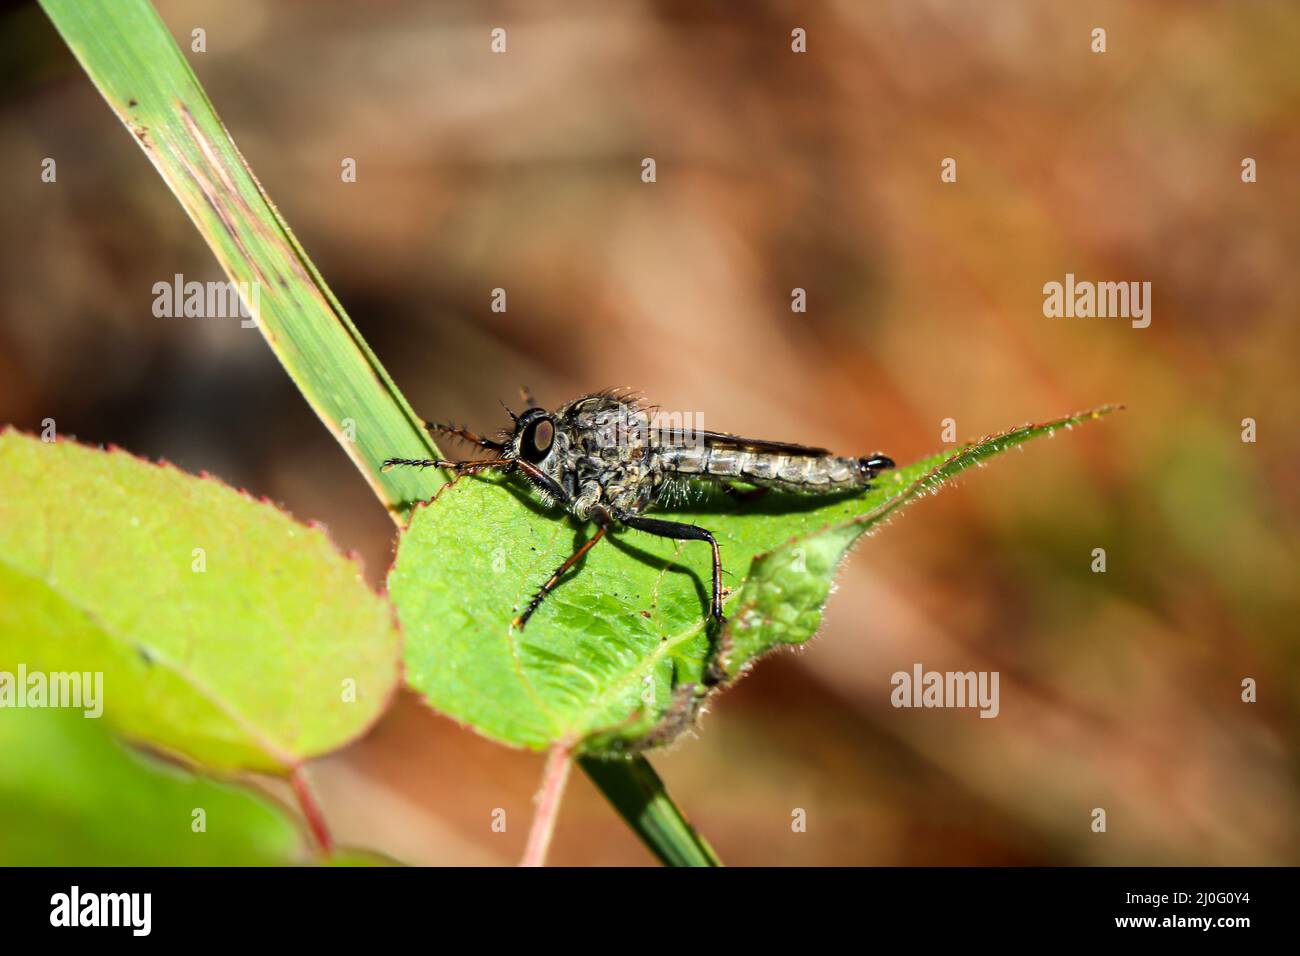 https://c8.alamy.com/comp/2J0G0Y4/a-close-up-of-a-fly-there-are-countless-types-of-flies-2J0G0Y4.jpg